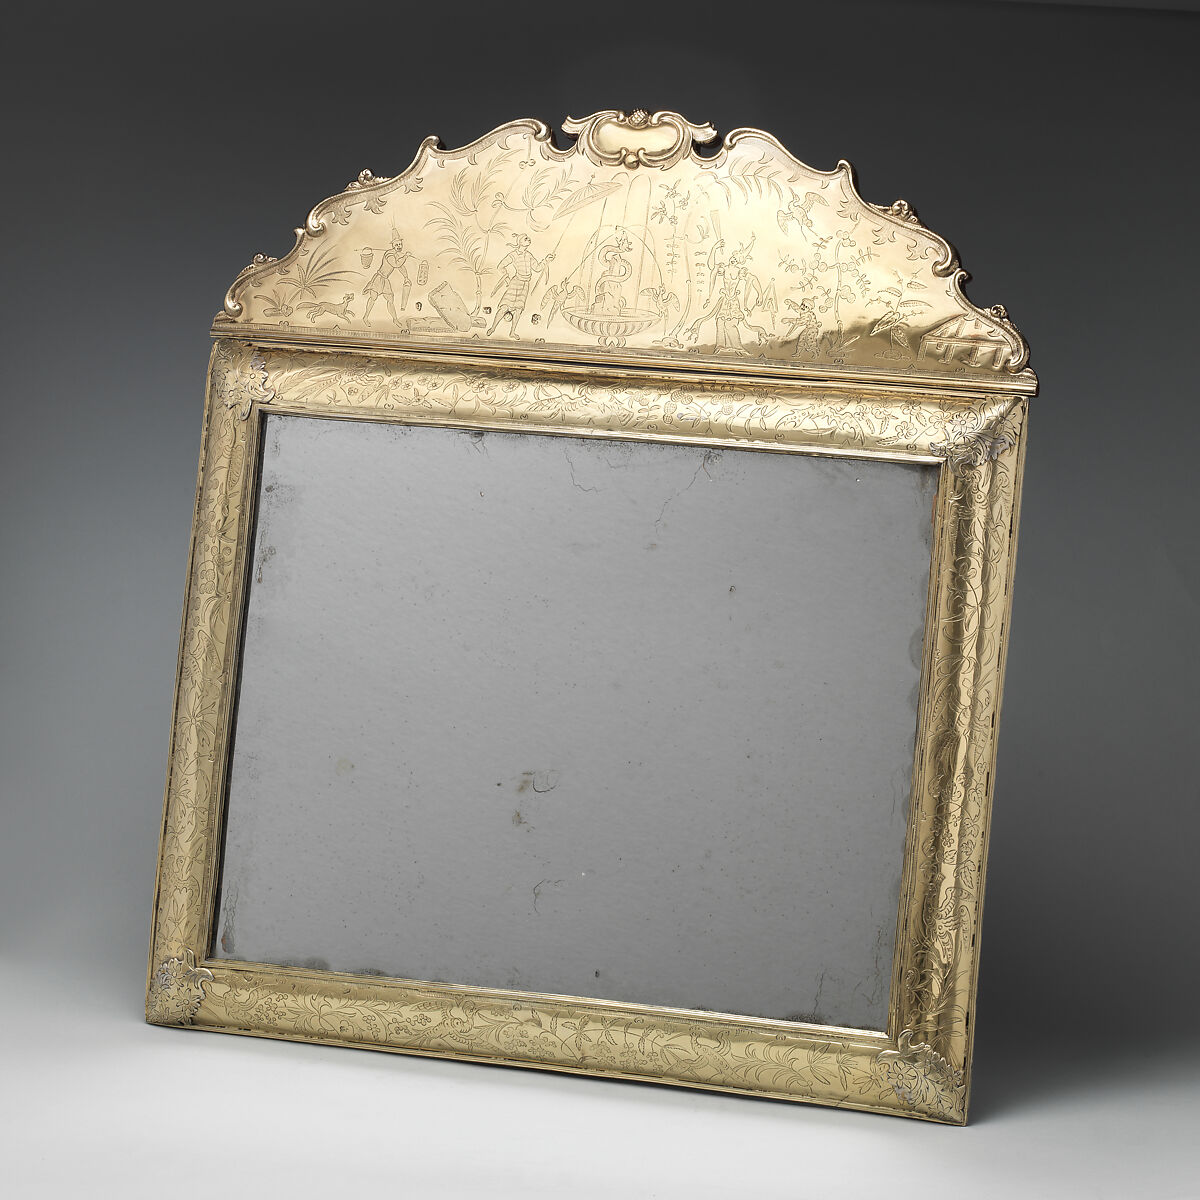 Mirror with cresting (part of a toilet service), William Fowle, Silver gilt, British, London